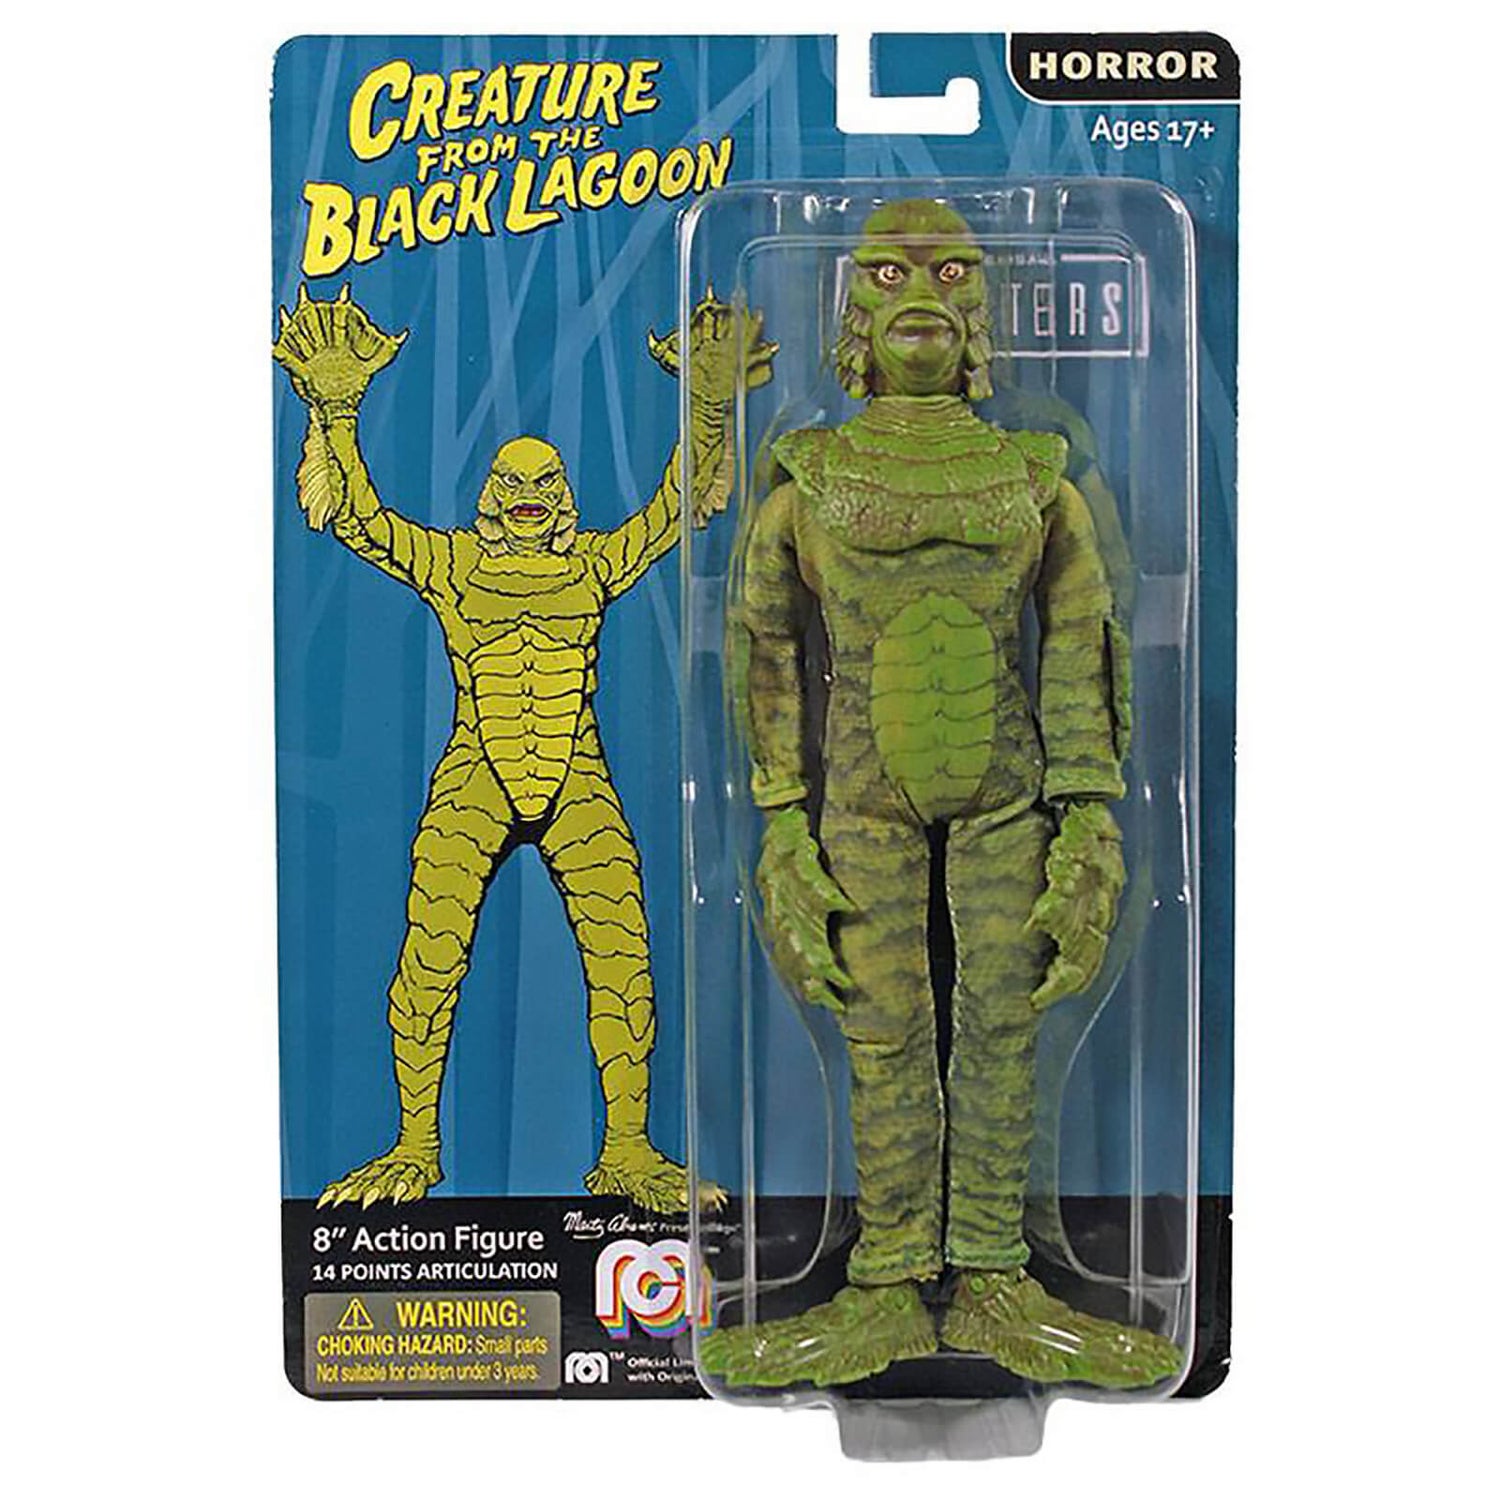 Mego 8" Figure - Universal Monsters Creature from the Black Lagoon